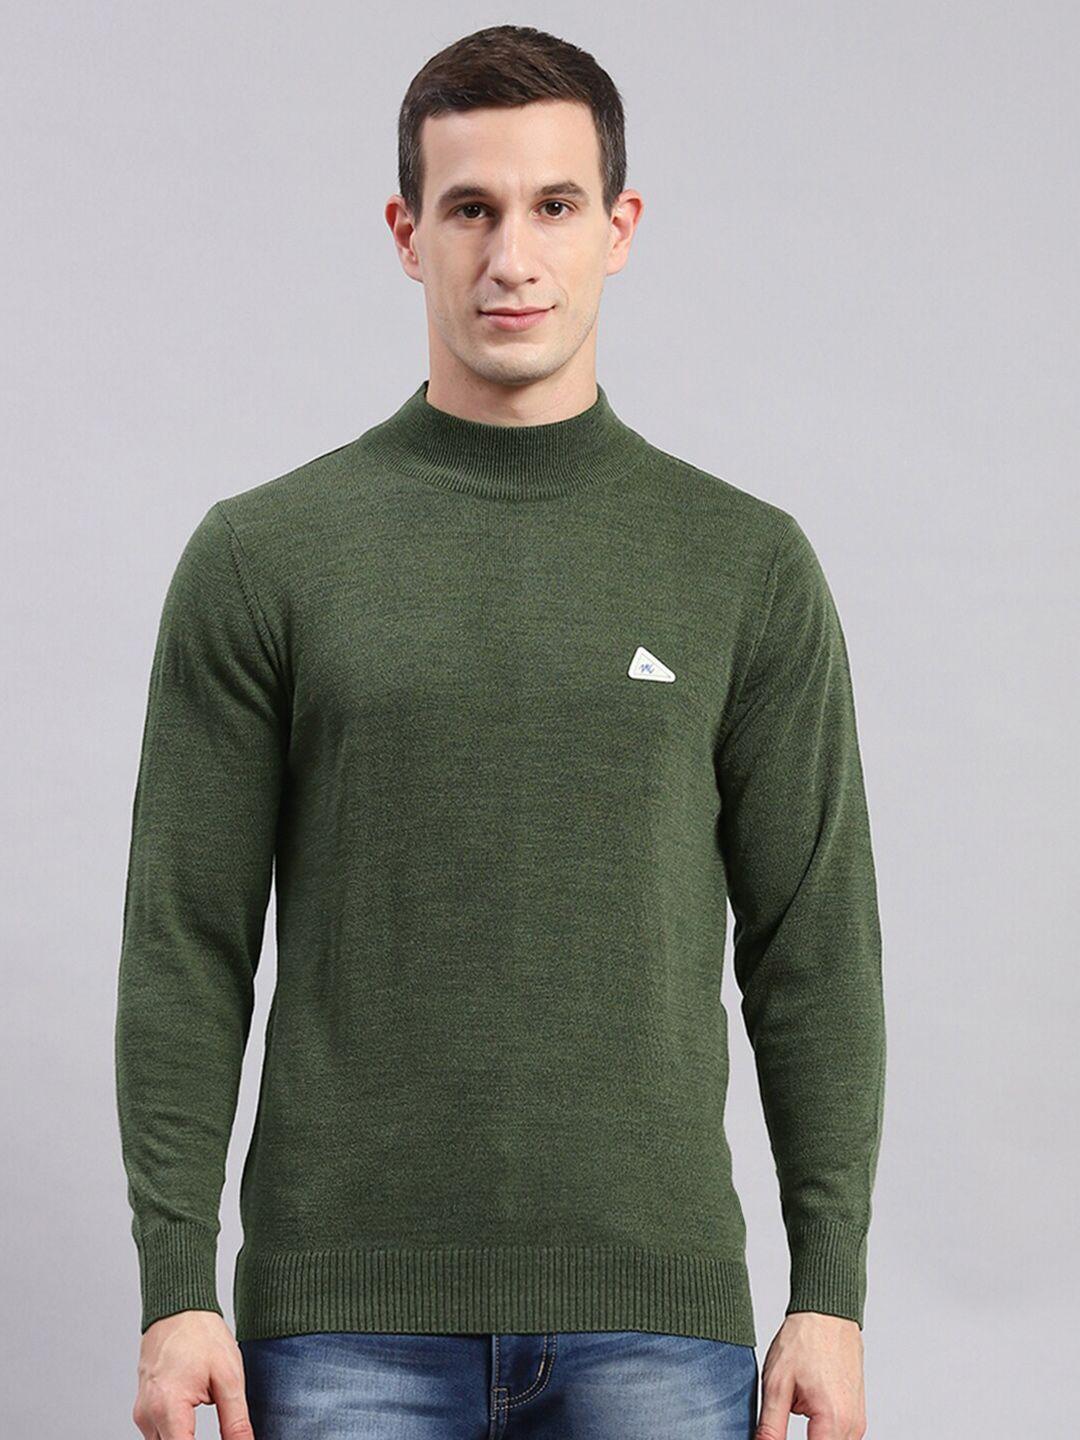 monte-carlo-high-neck-long-sleeves-pullover-sweater